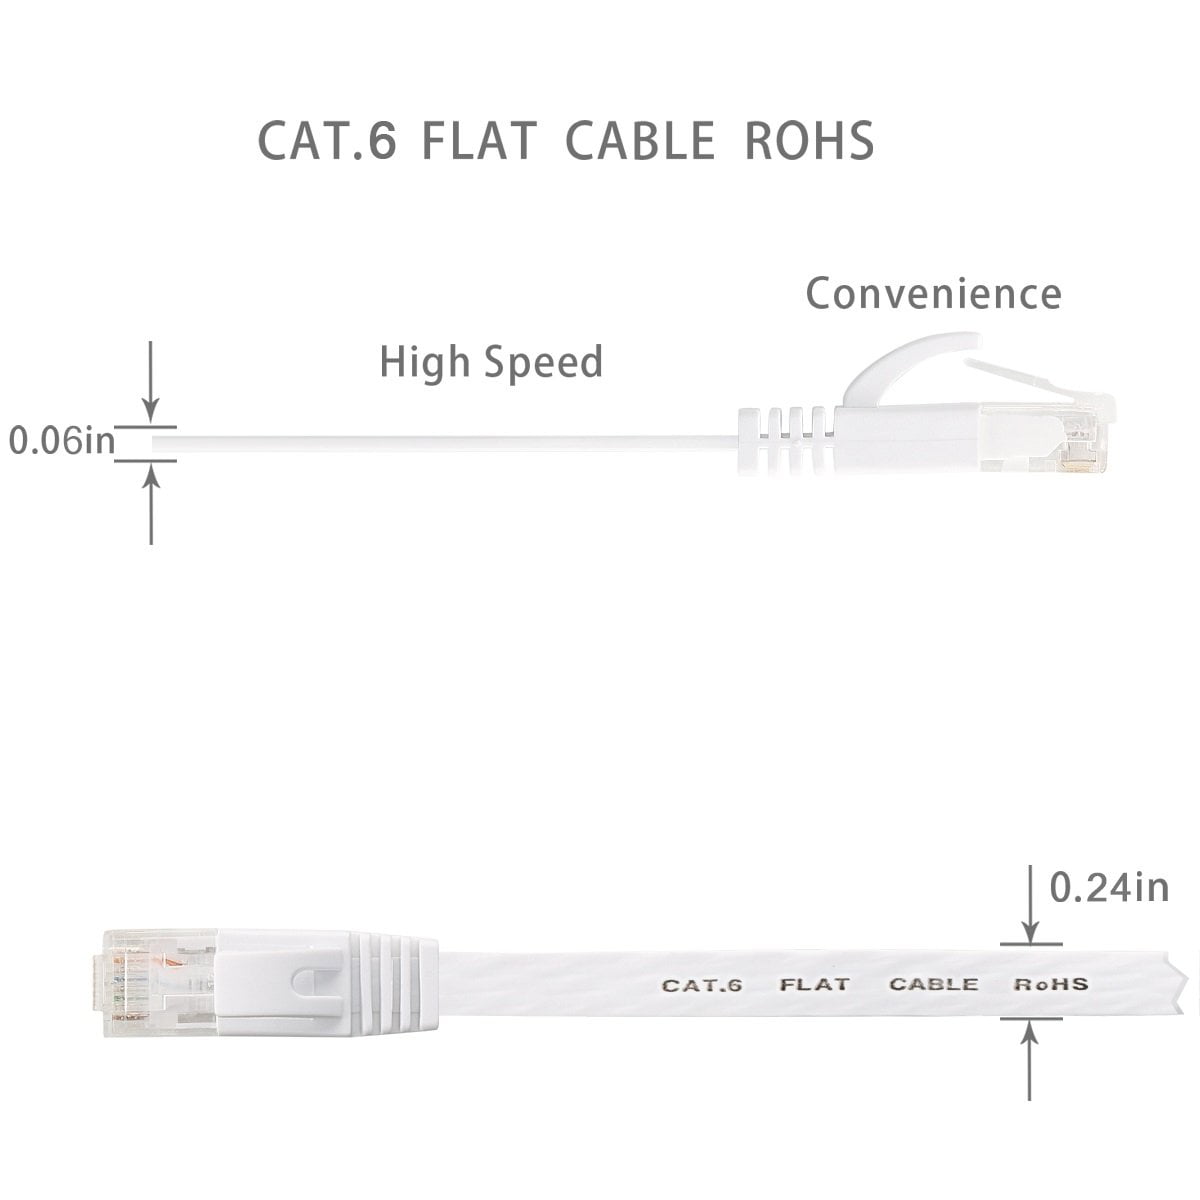 lovicool Cat 6 Ethernet Cable 100ft White Flat Internet LAN Patch Networking Cable 250MHz Speed Internet Patch Cable Snagless Rj45 Connectors with Cable Clips 30 Meters 